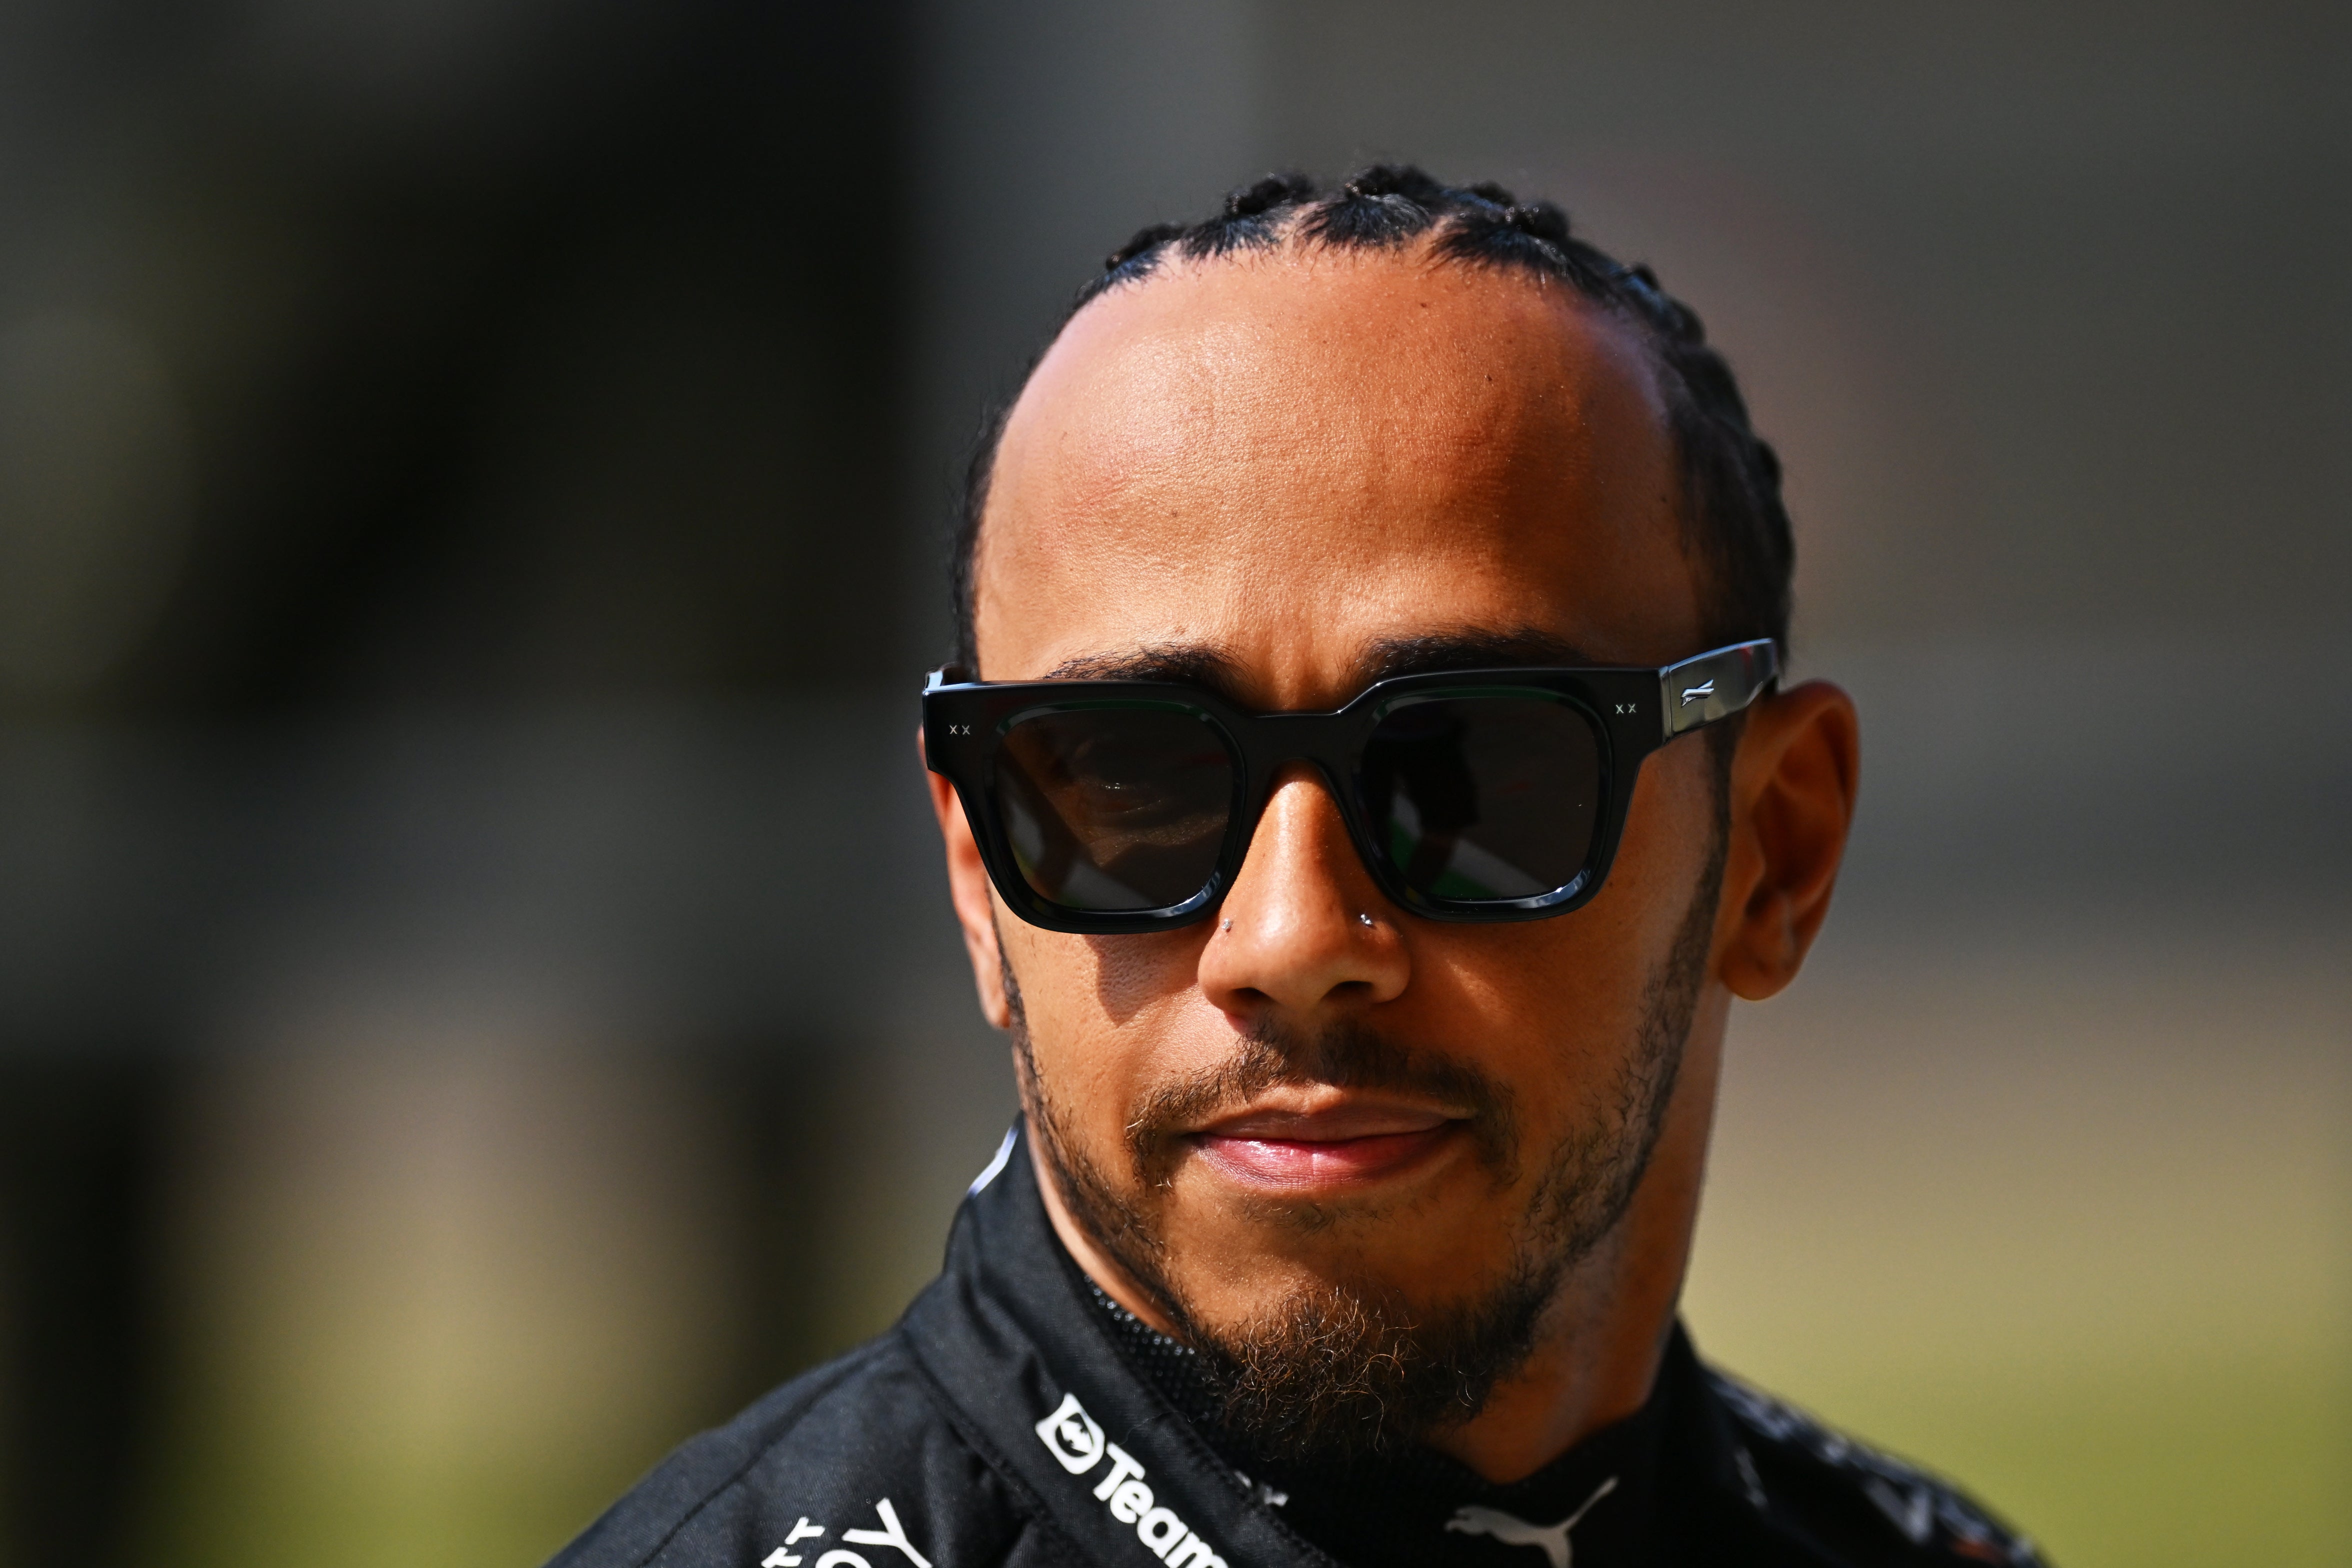 Lewis Hamilton admitted his Mercedes remains a ‘tough car to drive’